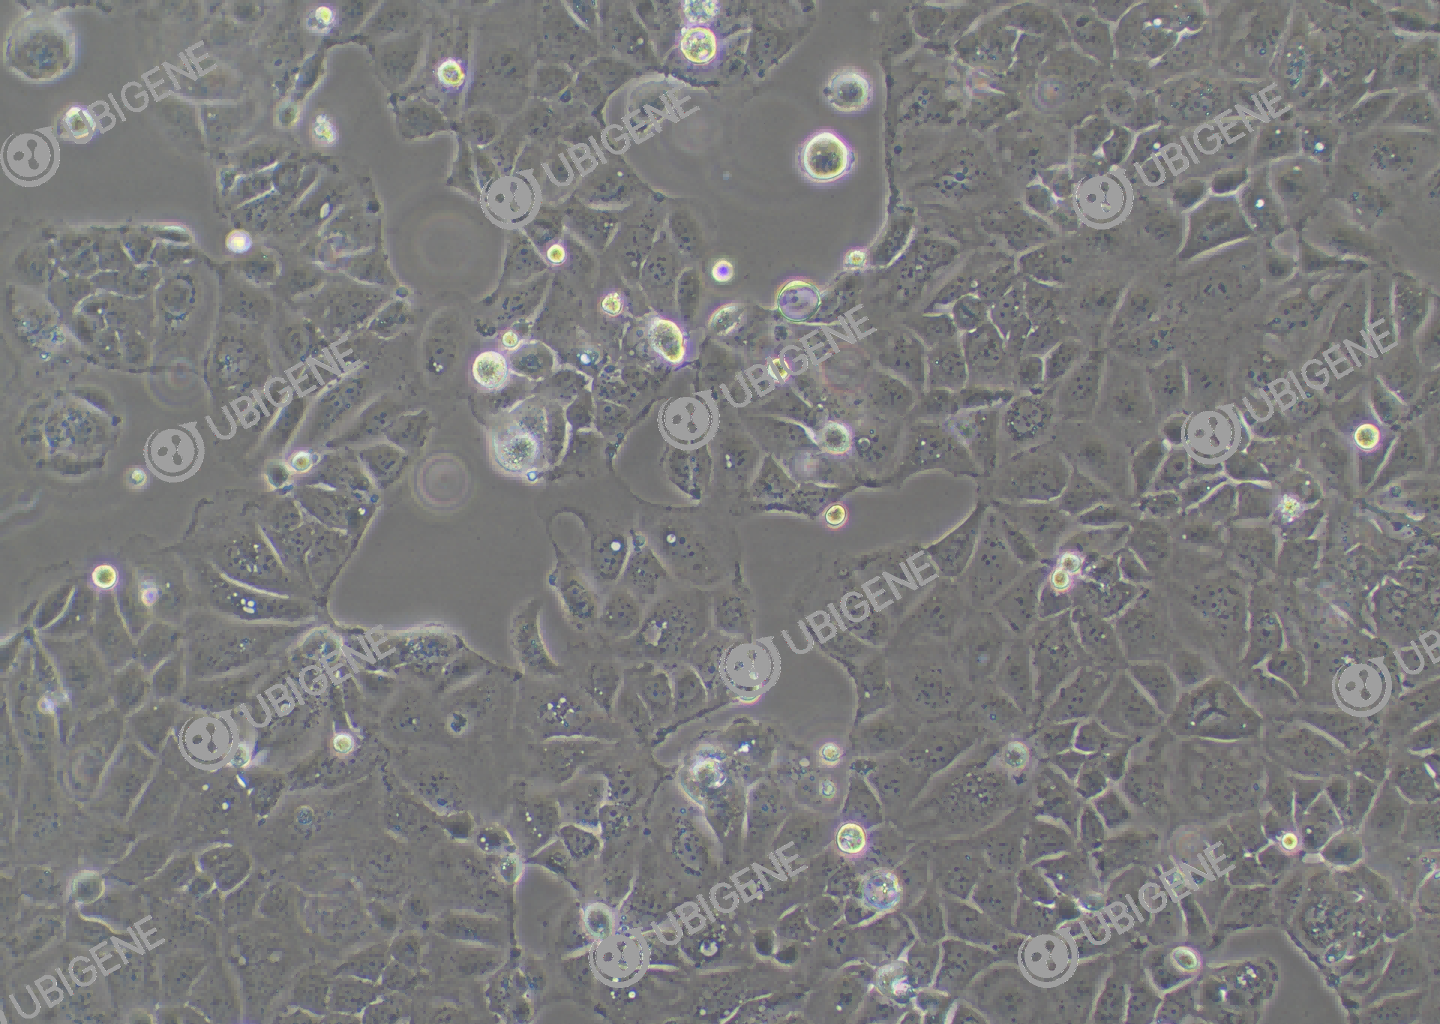 Caco-2 cell line Cultured cell morphology